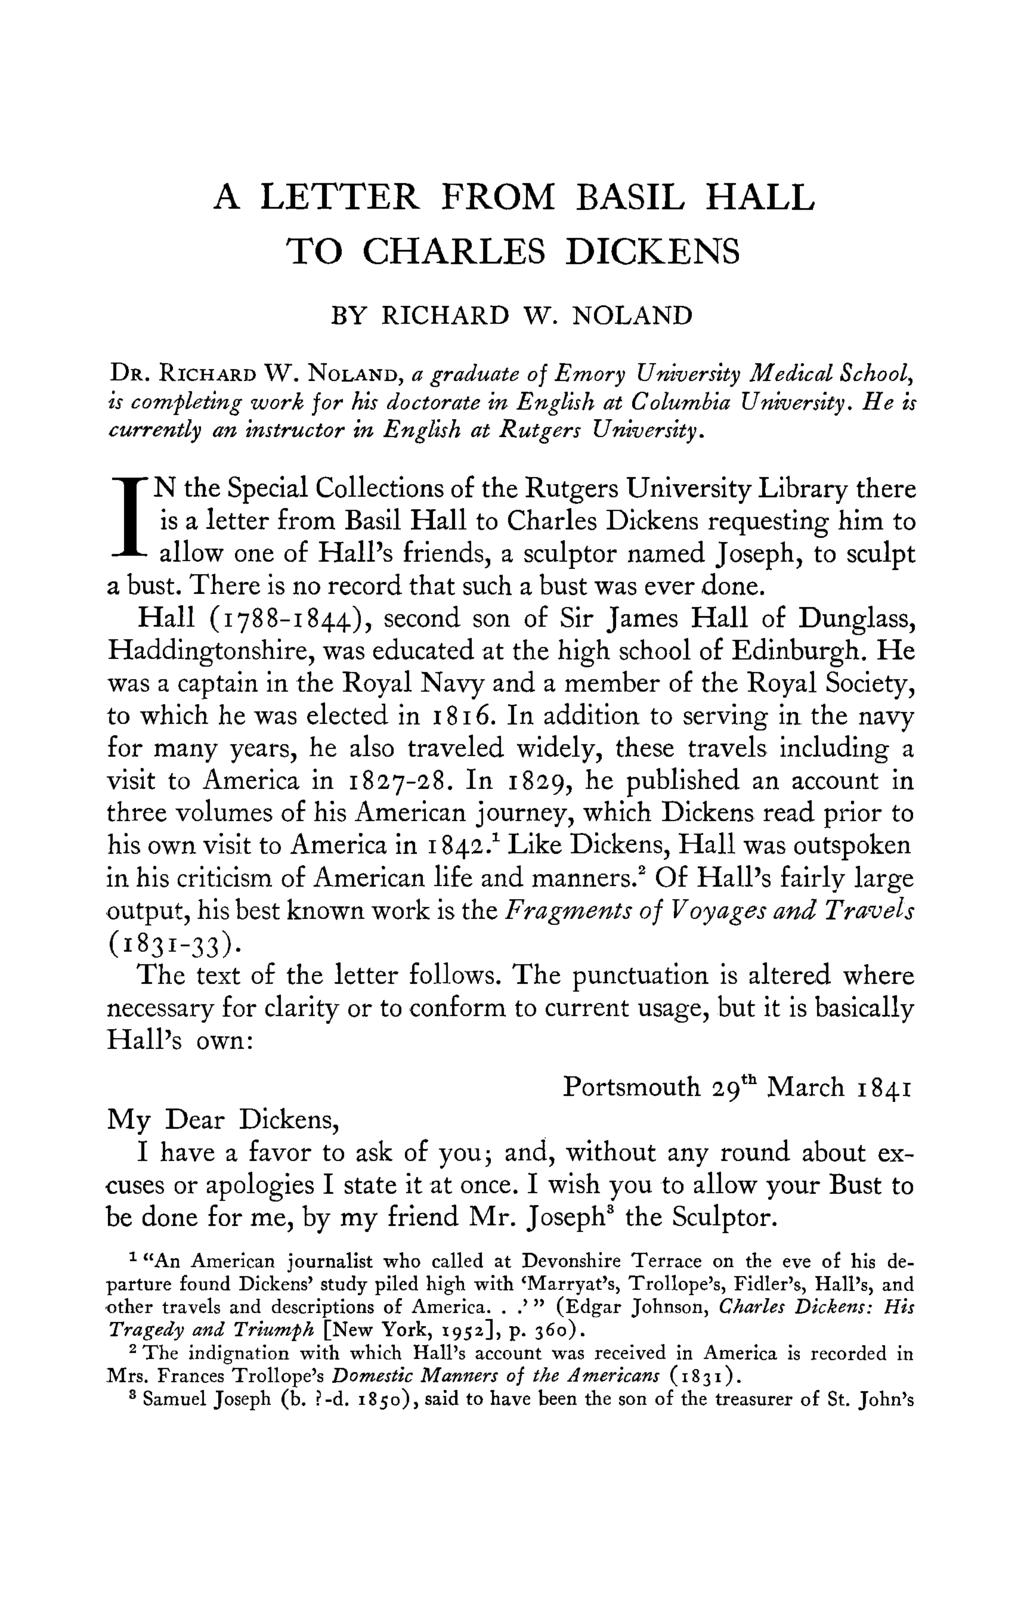 A LETTER FROM BASIL HALL TO CHARLES DICKENS BY RICHARD W. NOLAND DR. RICHARD W. NOLAND, a graduate of Emory University Medical School, is comfleting work for his doctorate in English at Columbia University.